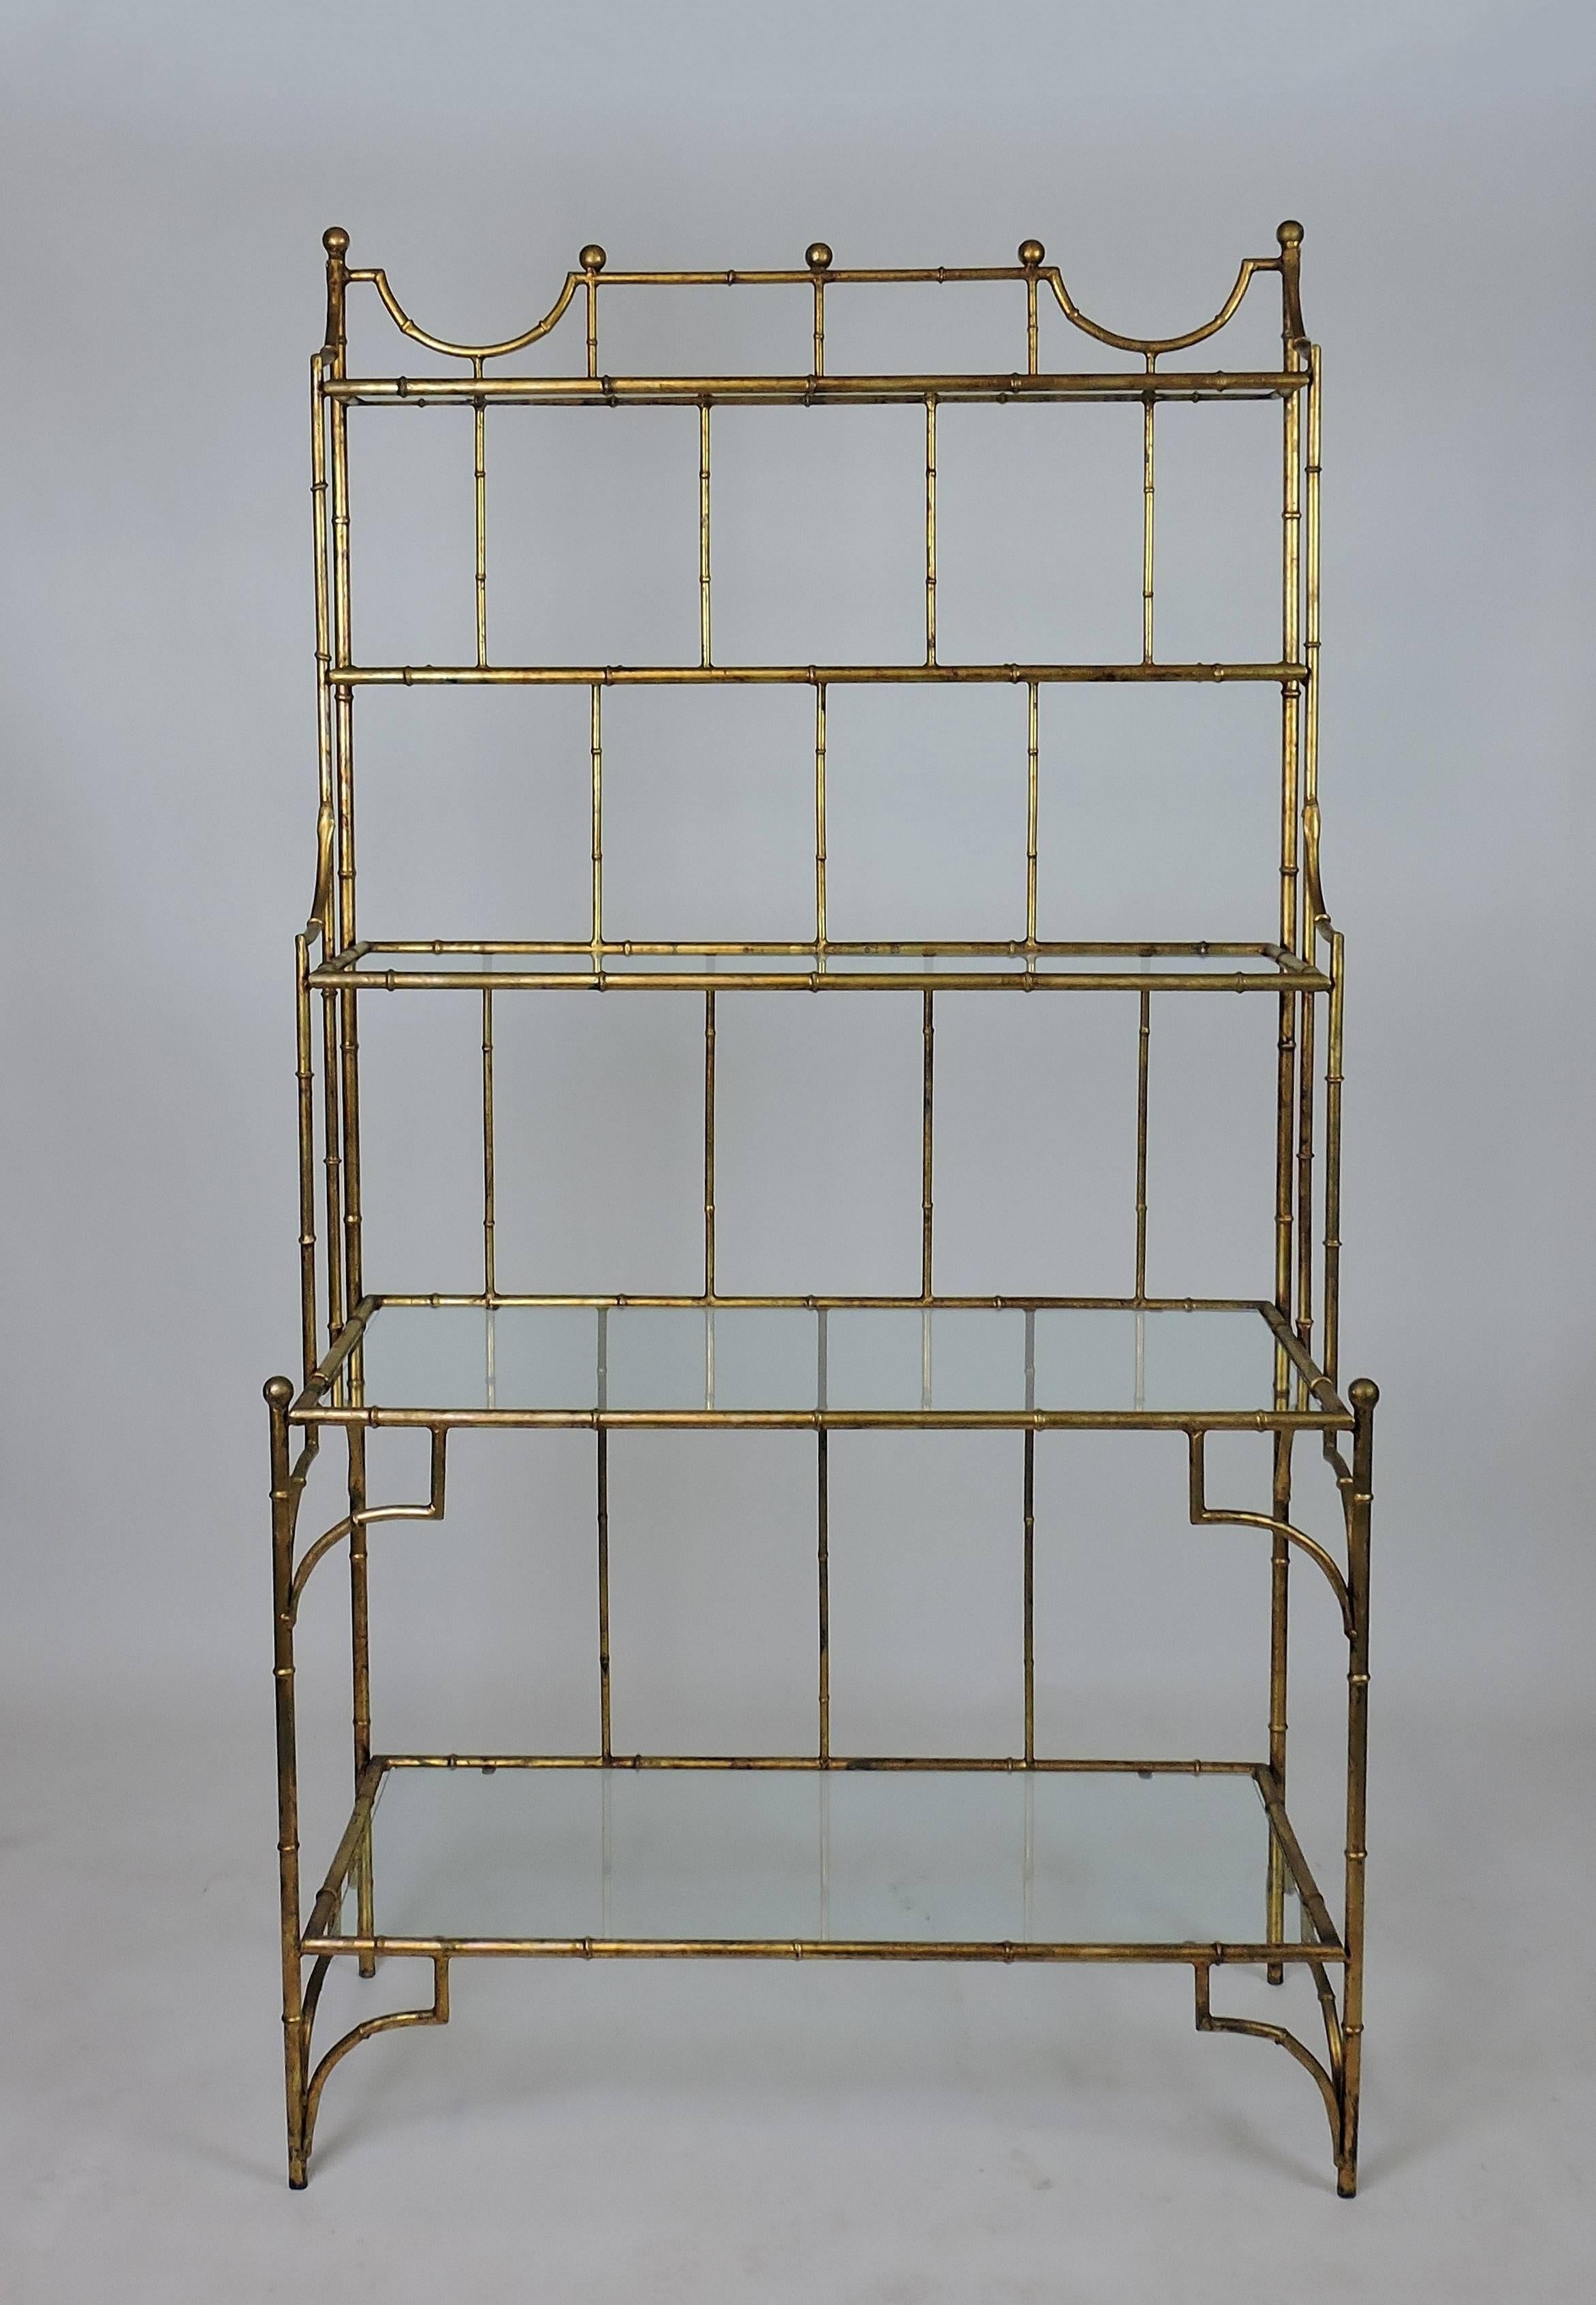 Striking faux bamboo iron and glass étagère. This high quality étagère has a beautiful antiqued gilt finish and five glass shelves of varying depth.
The glass shelves are removable for transporting.